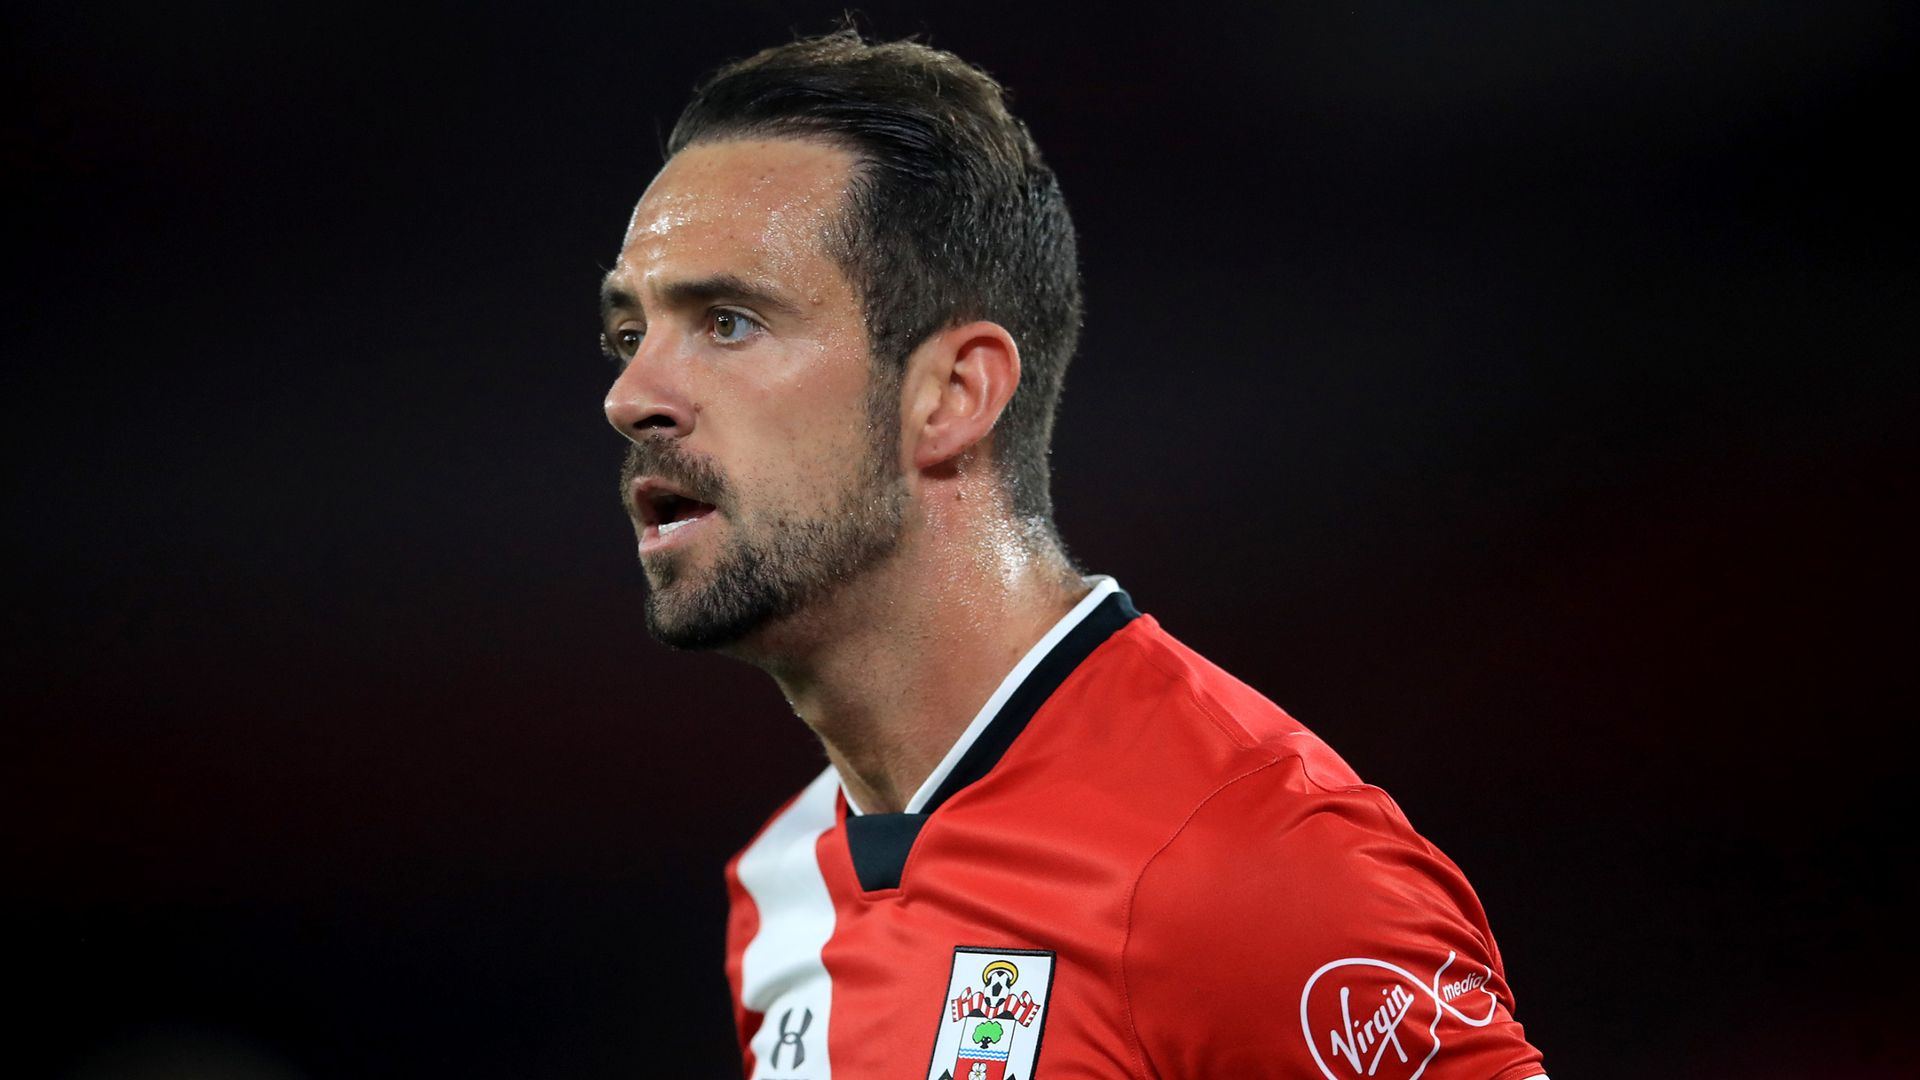 Hasenhuttl urges Ings to sign new deal